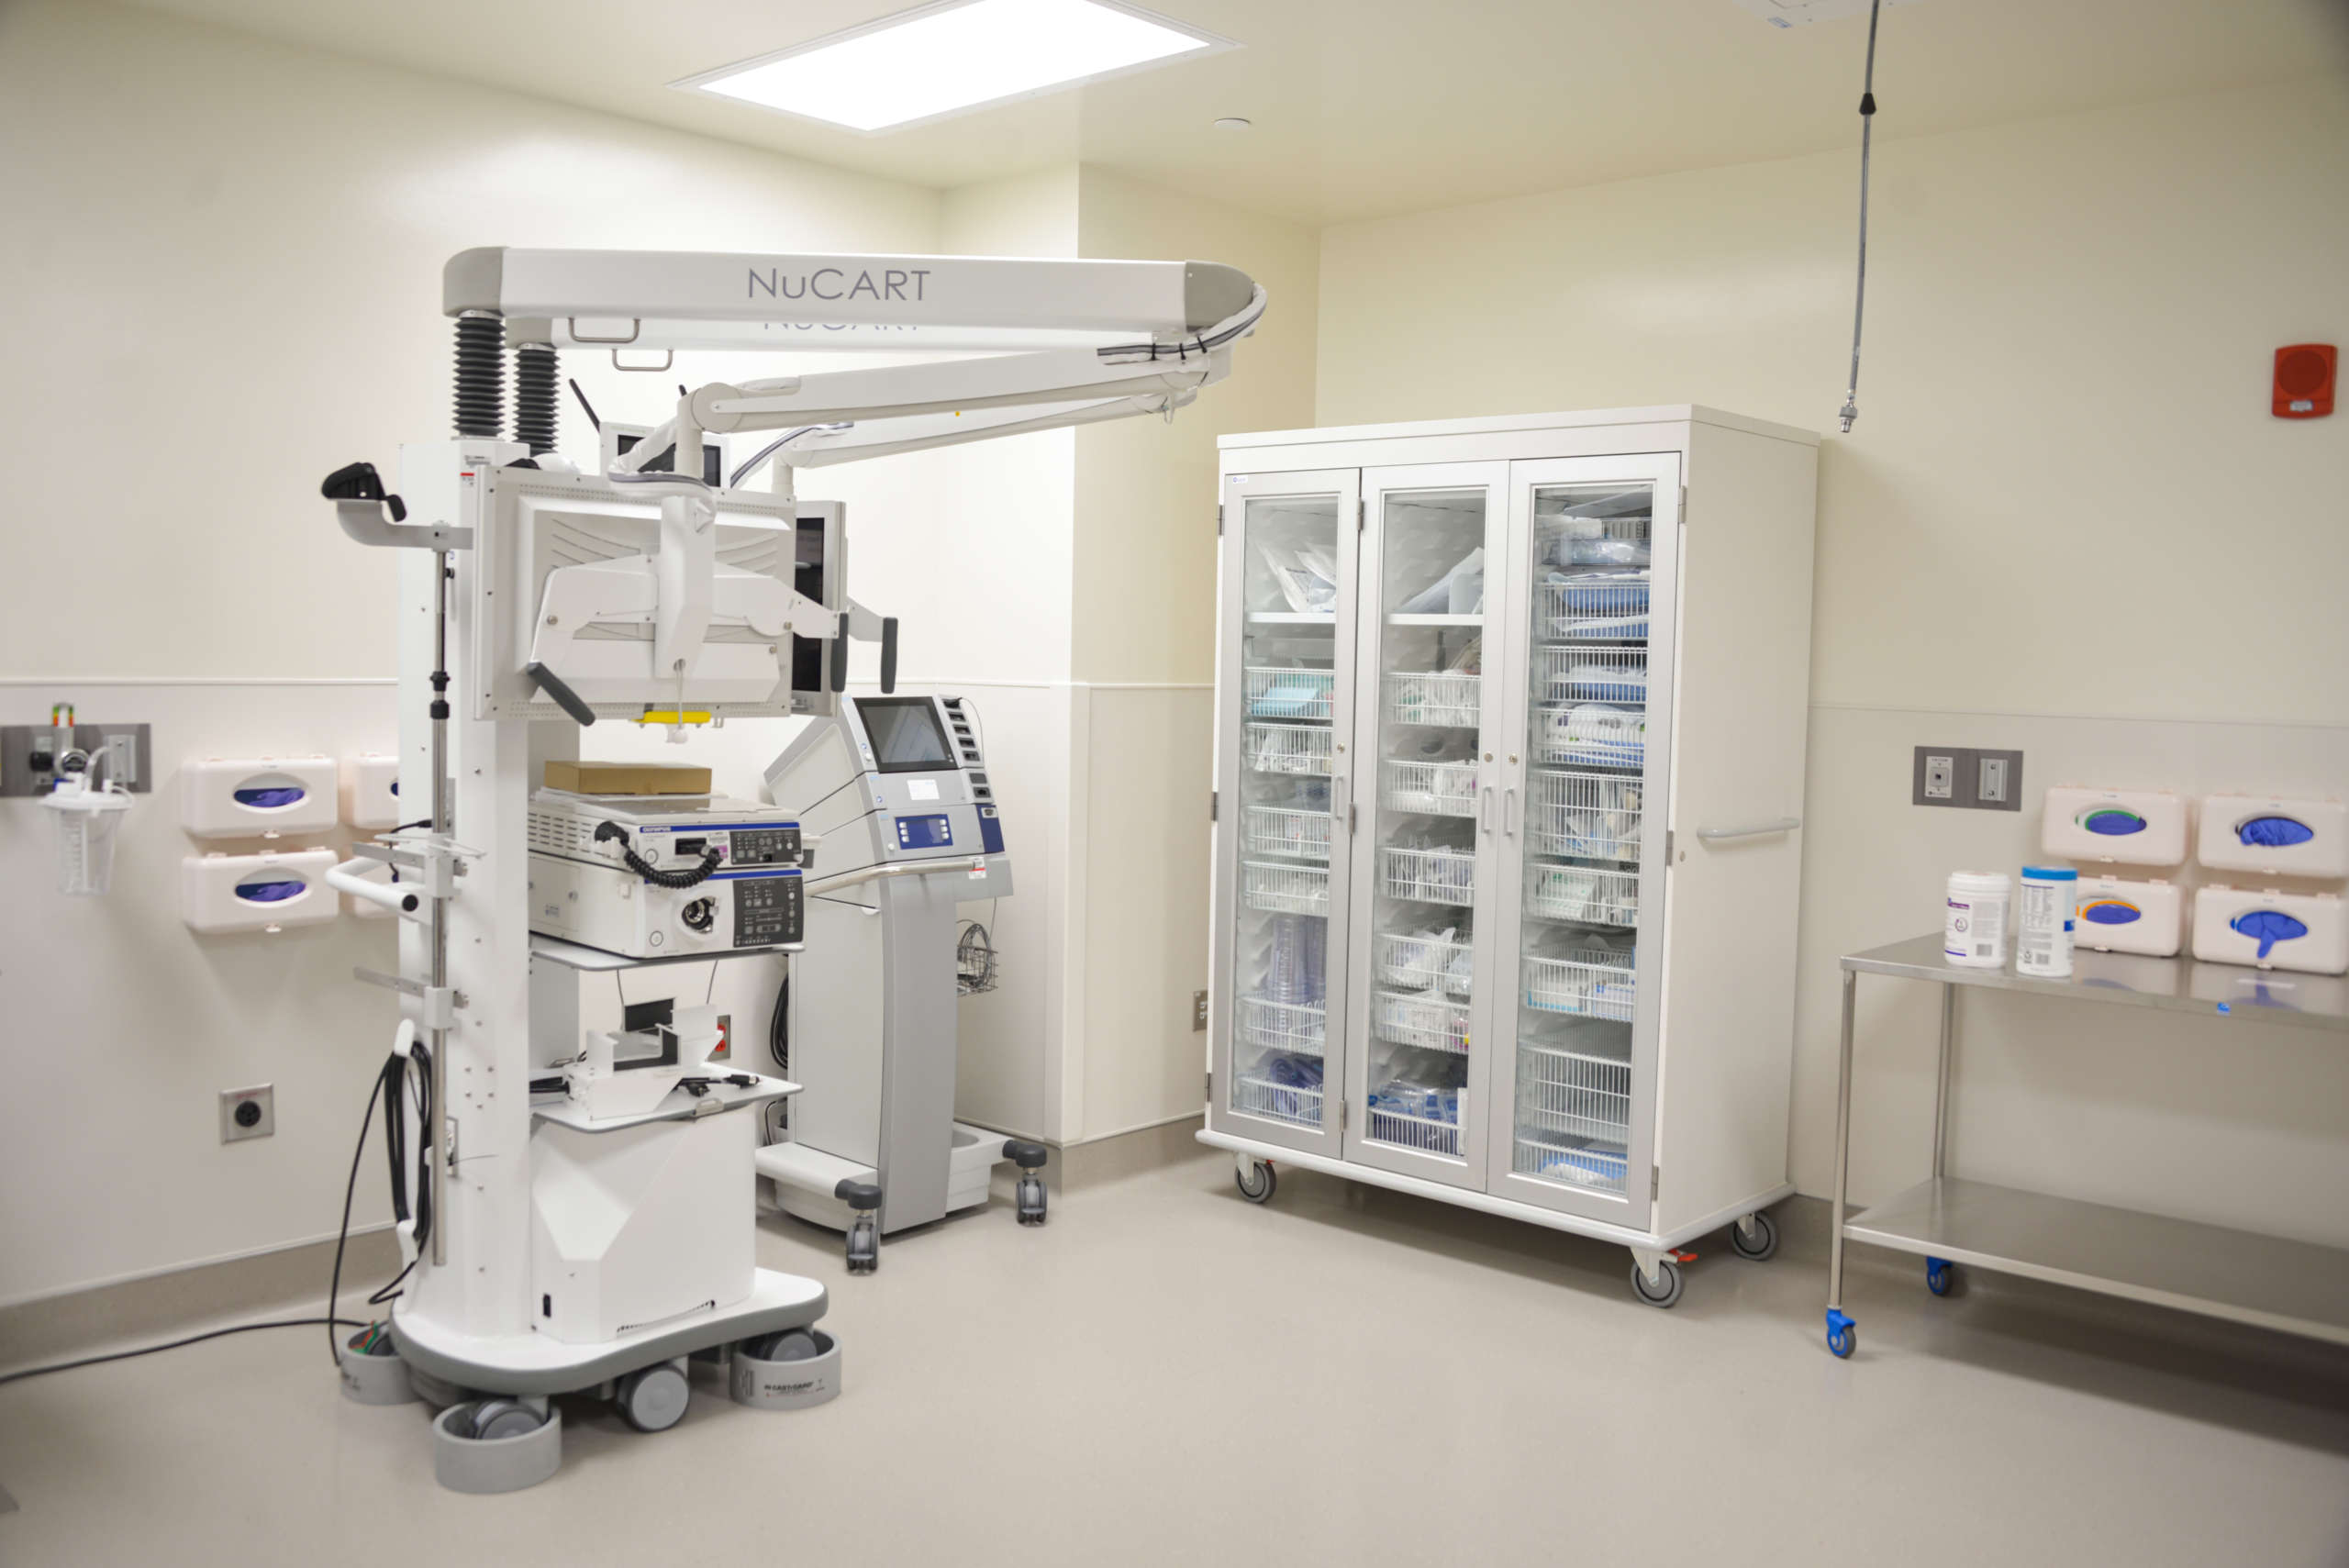 Medical equipment installed in a room at the UC Davis Health Pulmonary & GI Remodel